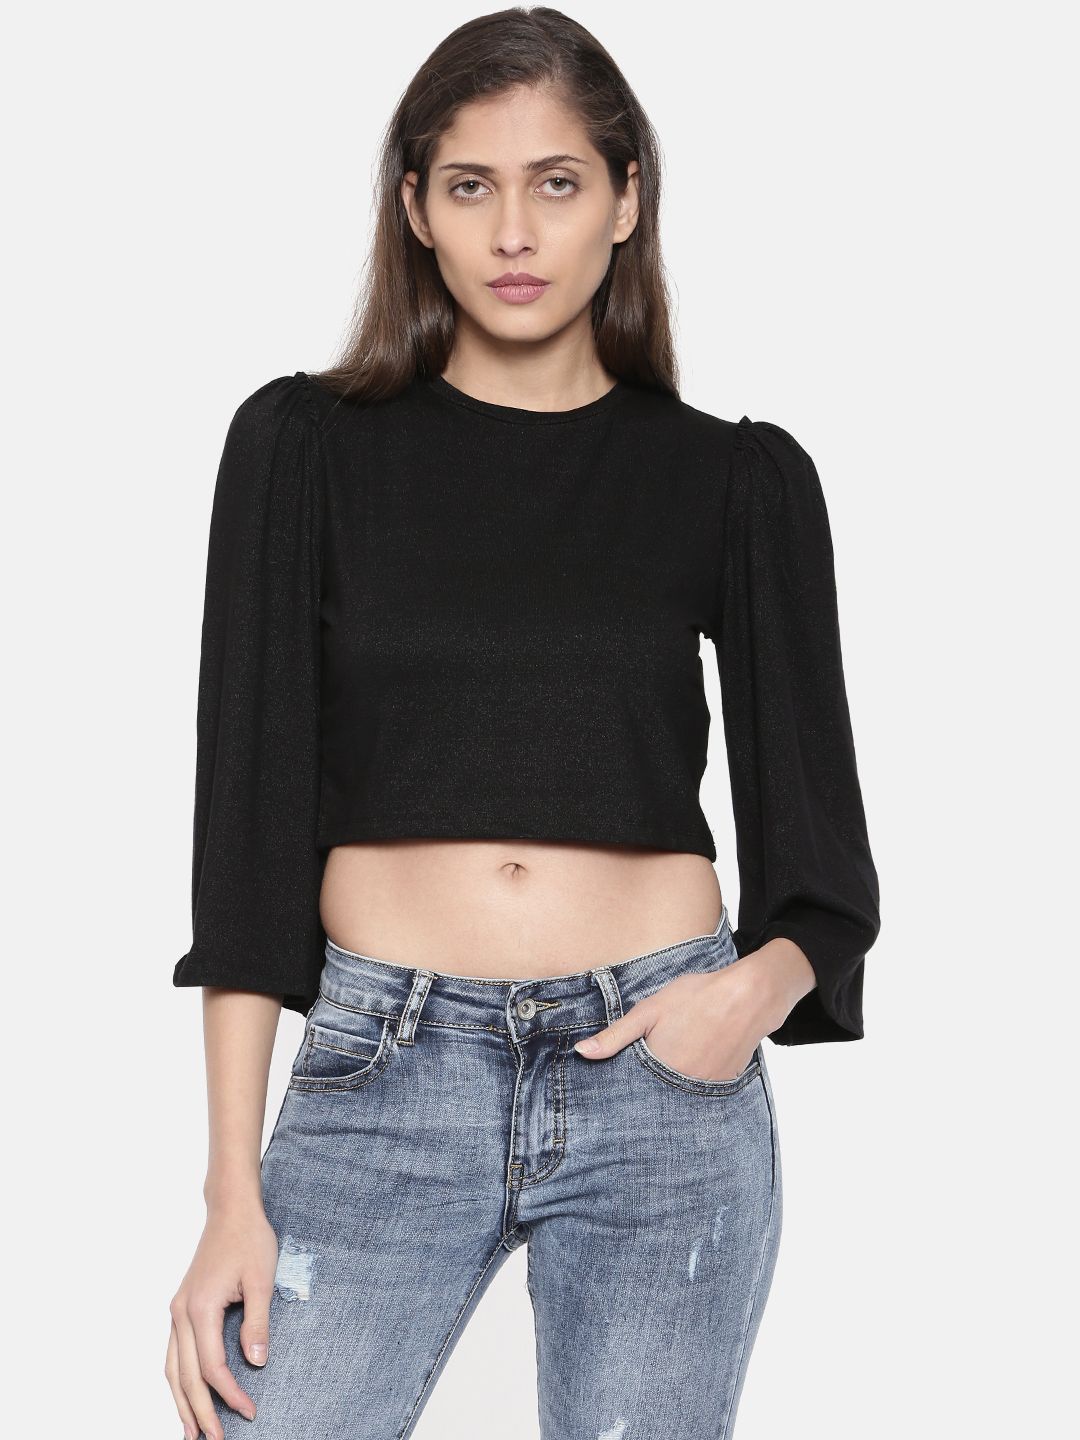 CAMLA Women Black Solid Top Price in India